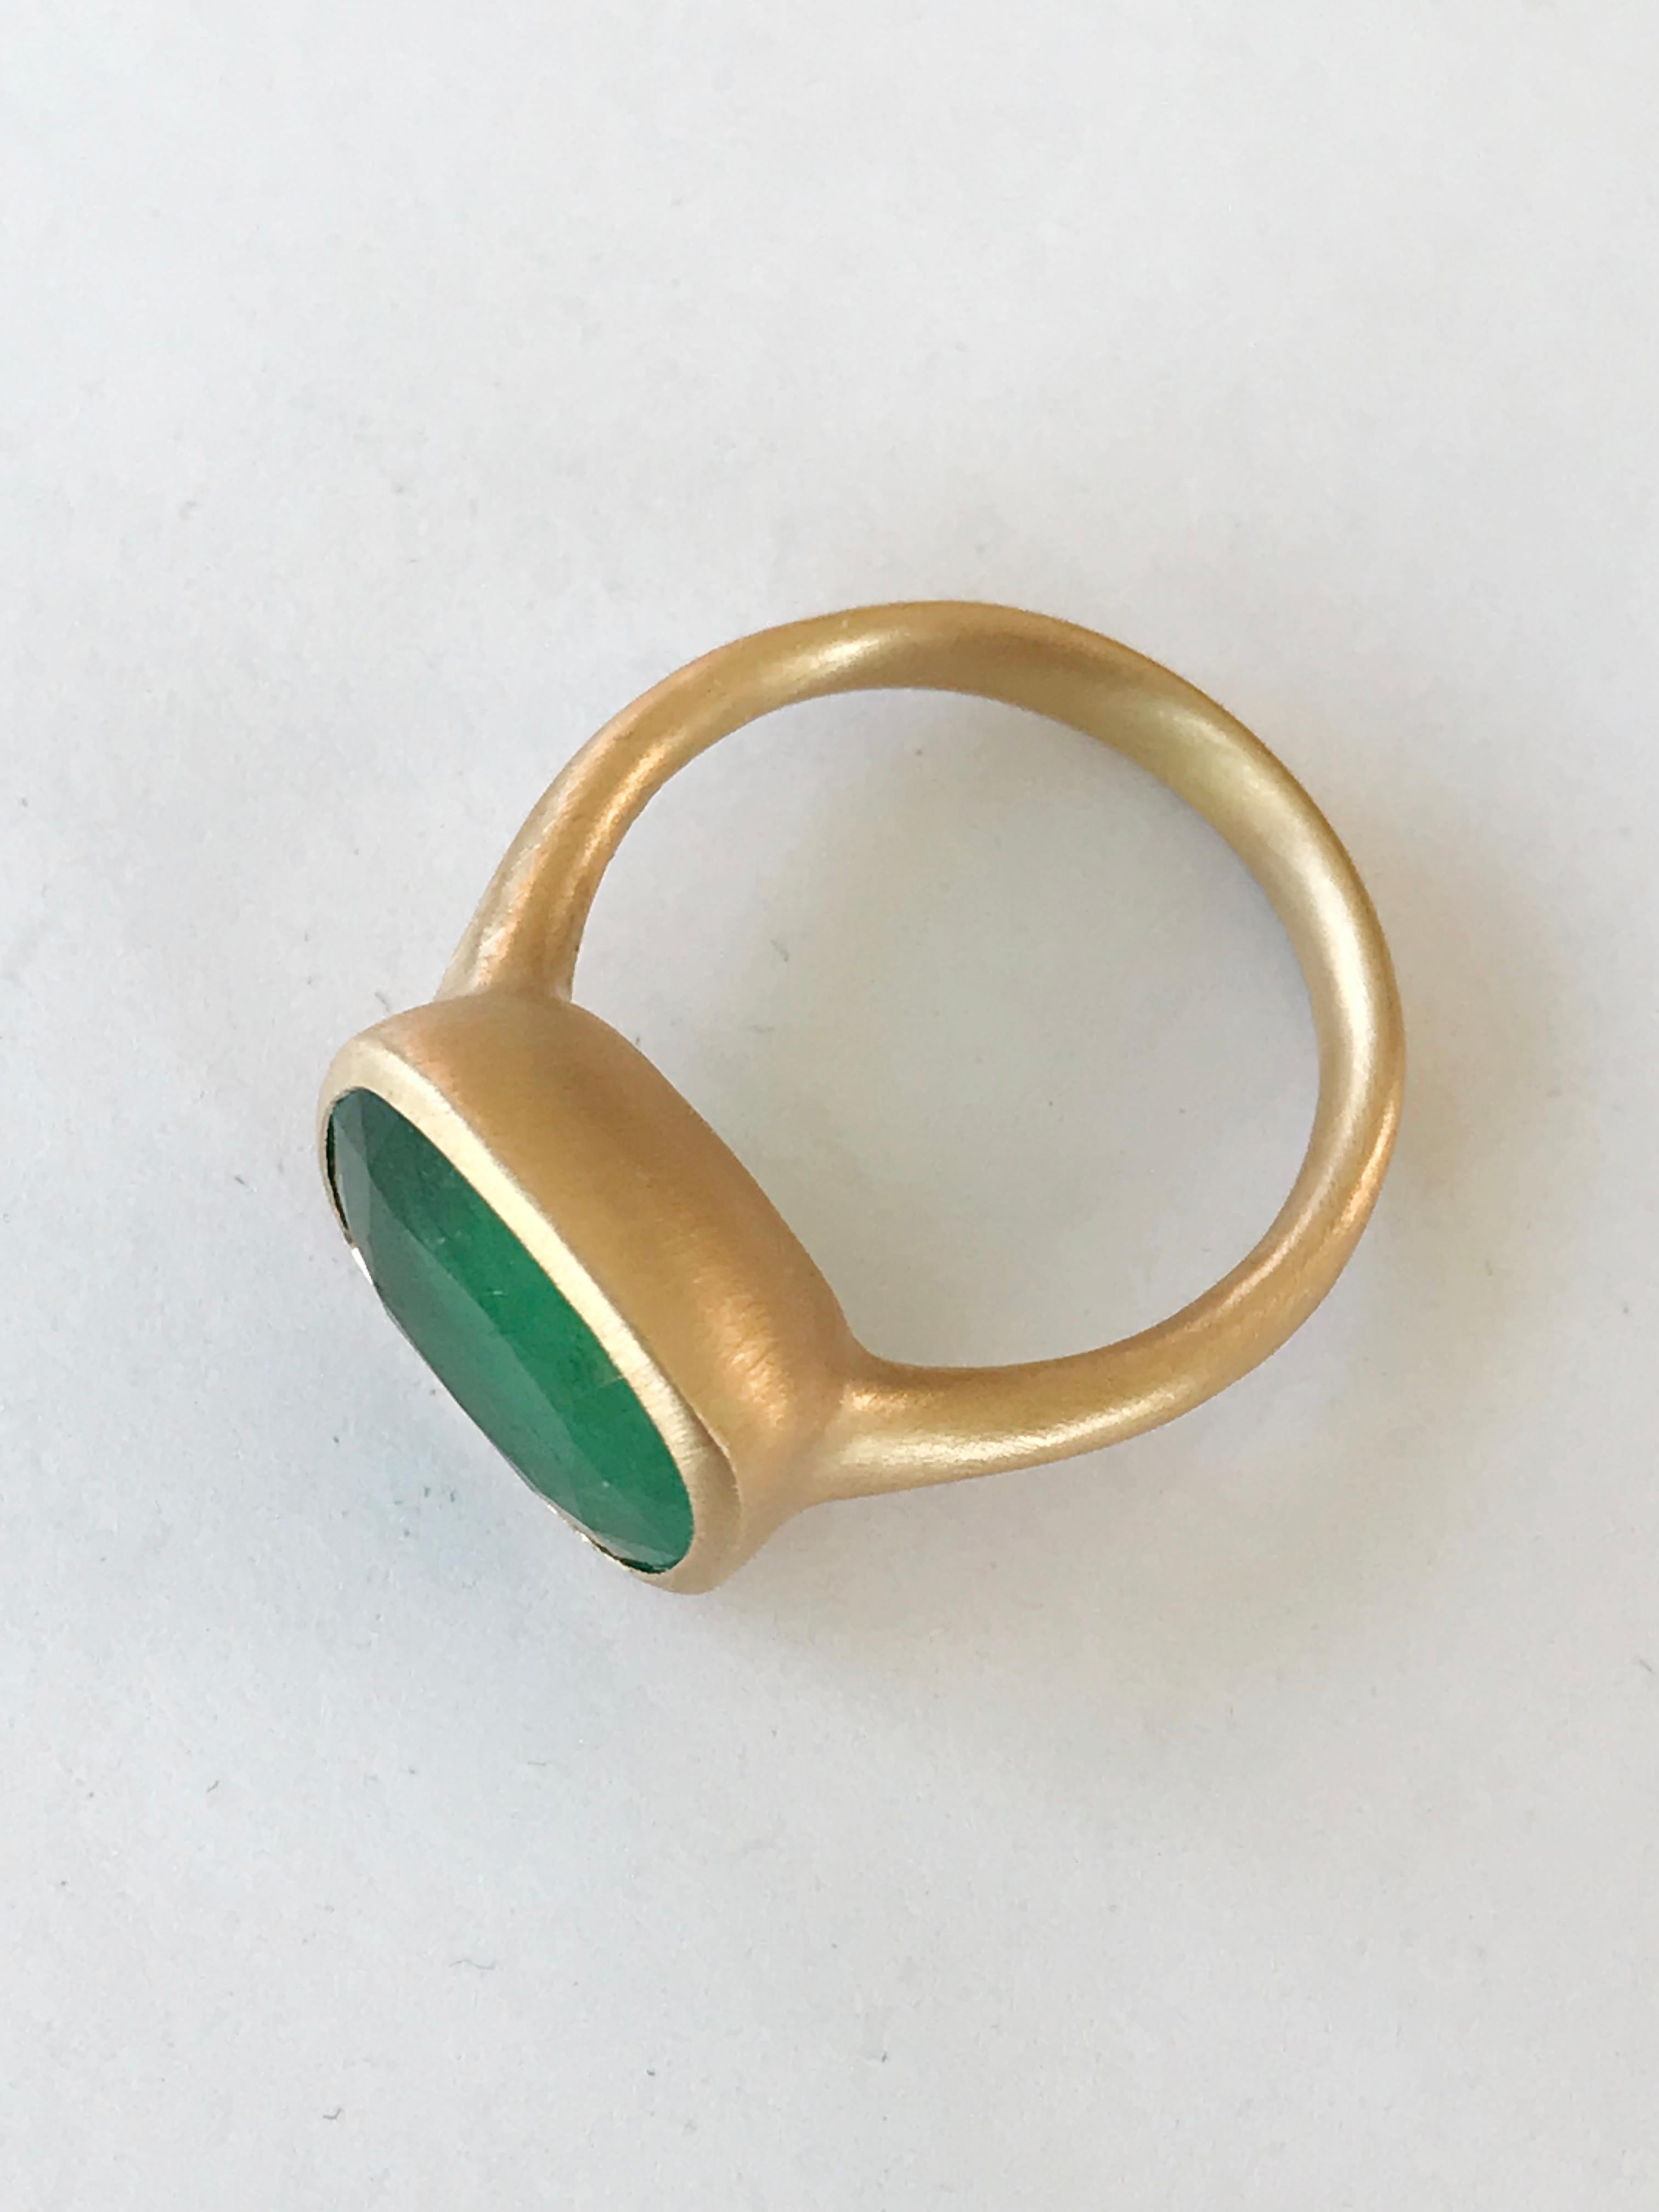 Dalben 4.9 Carat Emerald Yellow Gold Ring For Sale 10